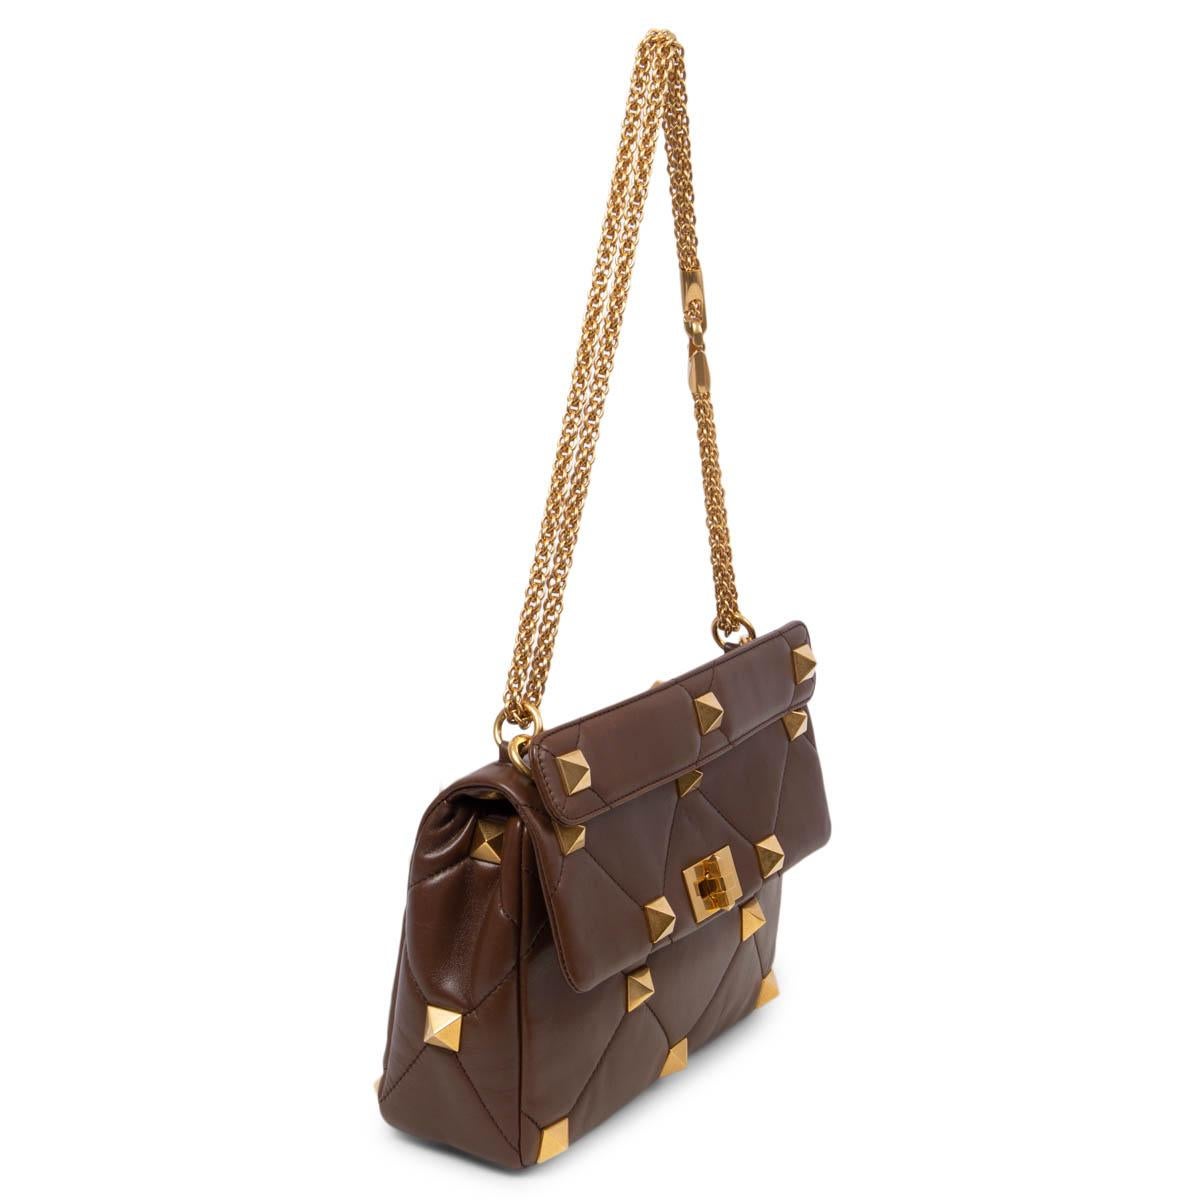 100% authentic Valentino Large Roman Stud shoulder bag in quilted brown nappa lambskin leather featuring gold-tone metal maxi studs. Equipped with both a detachable sliding chain strap and a detachable handle, this accessory can be worn as a